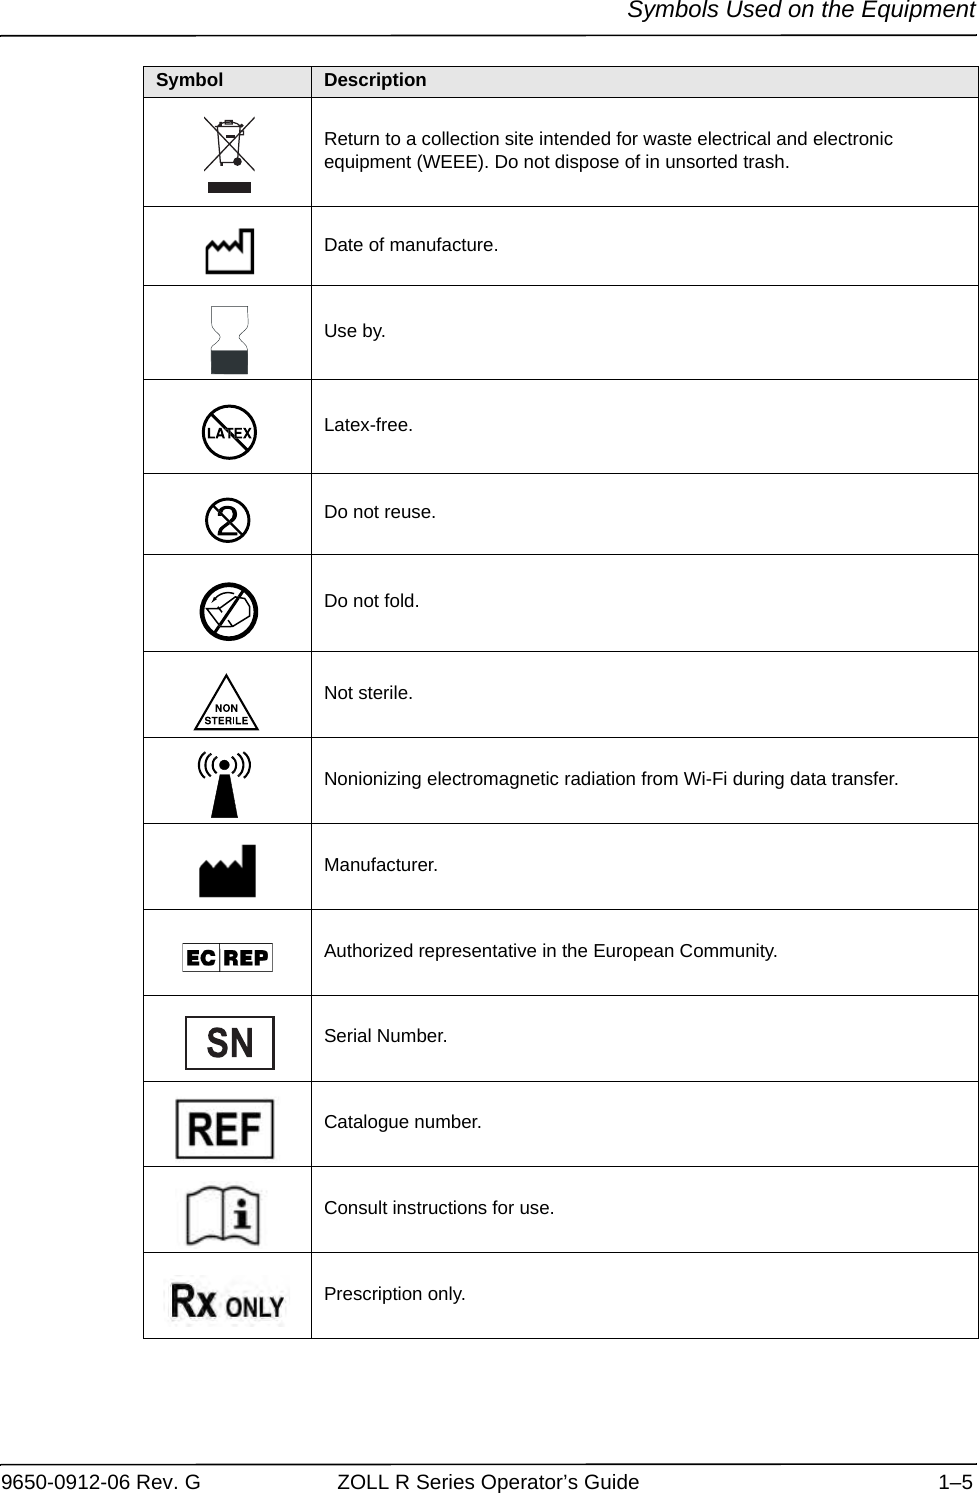 Symbols Used on the Equipment9650-0912-06 Rev. G ZOLL R Series Operator’s Guide 1–5Return to a collection site intended for waste electrical and electronic equipment (WEEE). Do not dispose of in unsorted trash.Date of manufacture.Use by.Latex-free.Do not reuse.Do not fold.Not sterile.Nonionizing electromagnetic radiation from Wi-Fi during data transfer.Manufacturer.Authorized representative in the European Community.Serial Number.Catalogue number.Consult instructions for use.Prescription only.Symbol Description